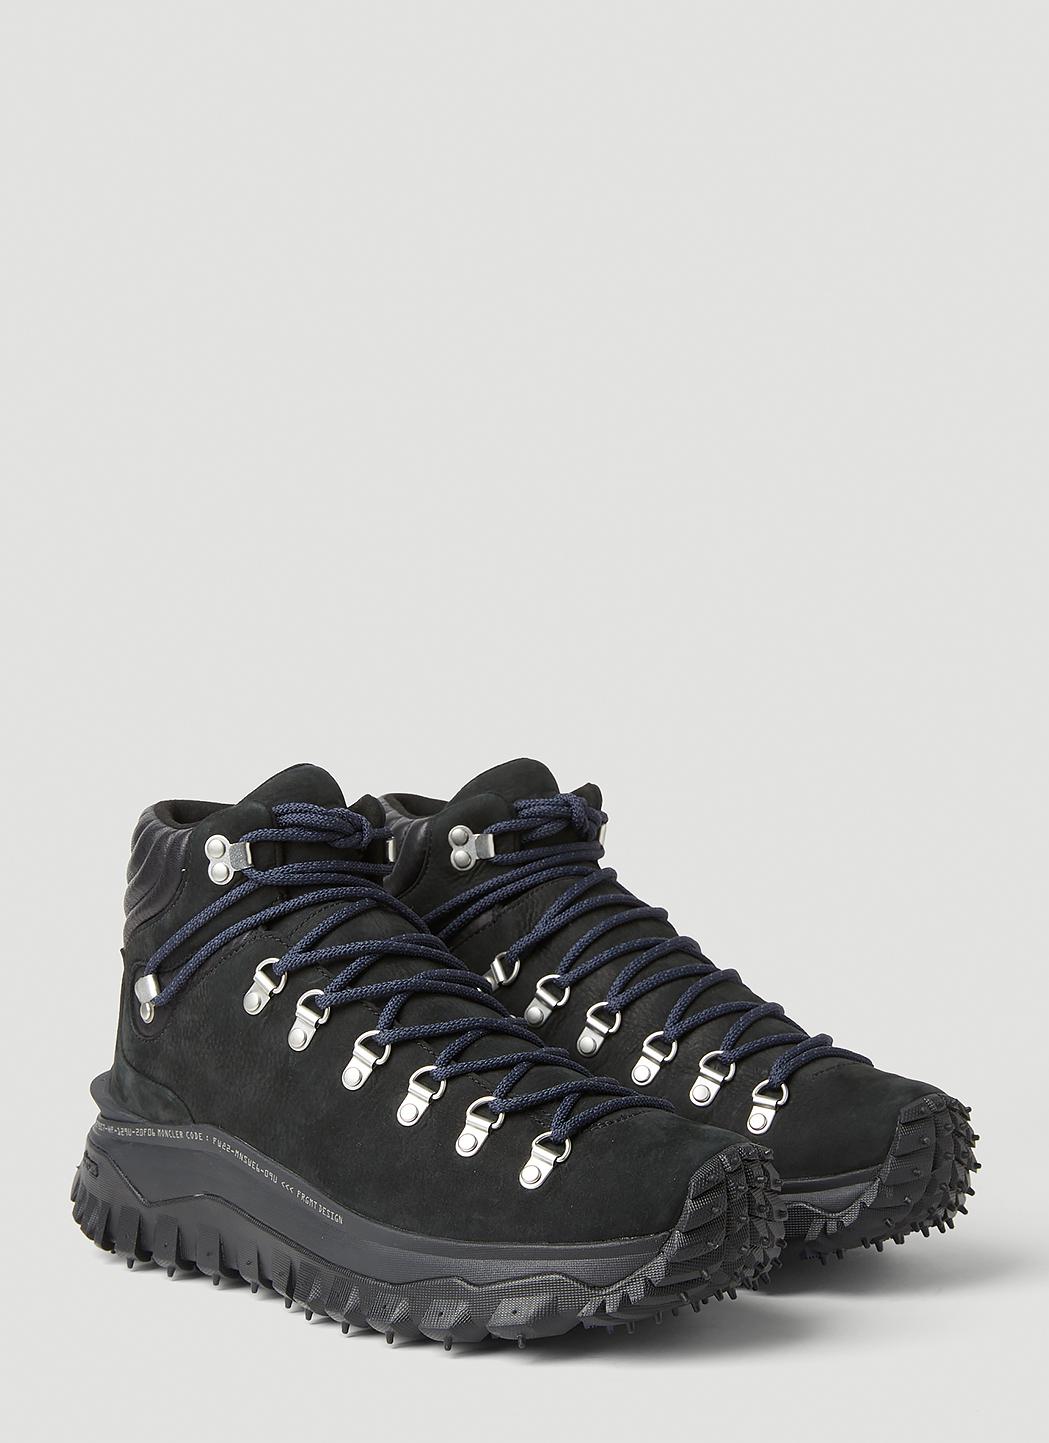 7 MONCLER FRAGMENT Trailgrip Gtx High Top Sneakers in Black for 